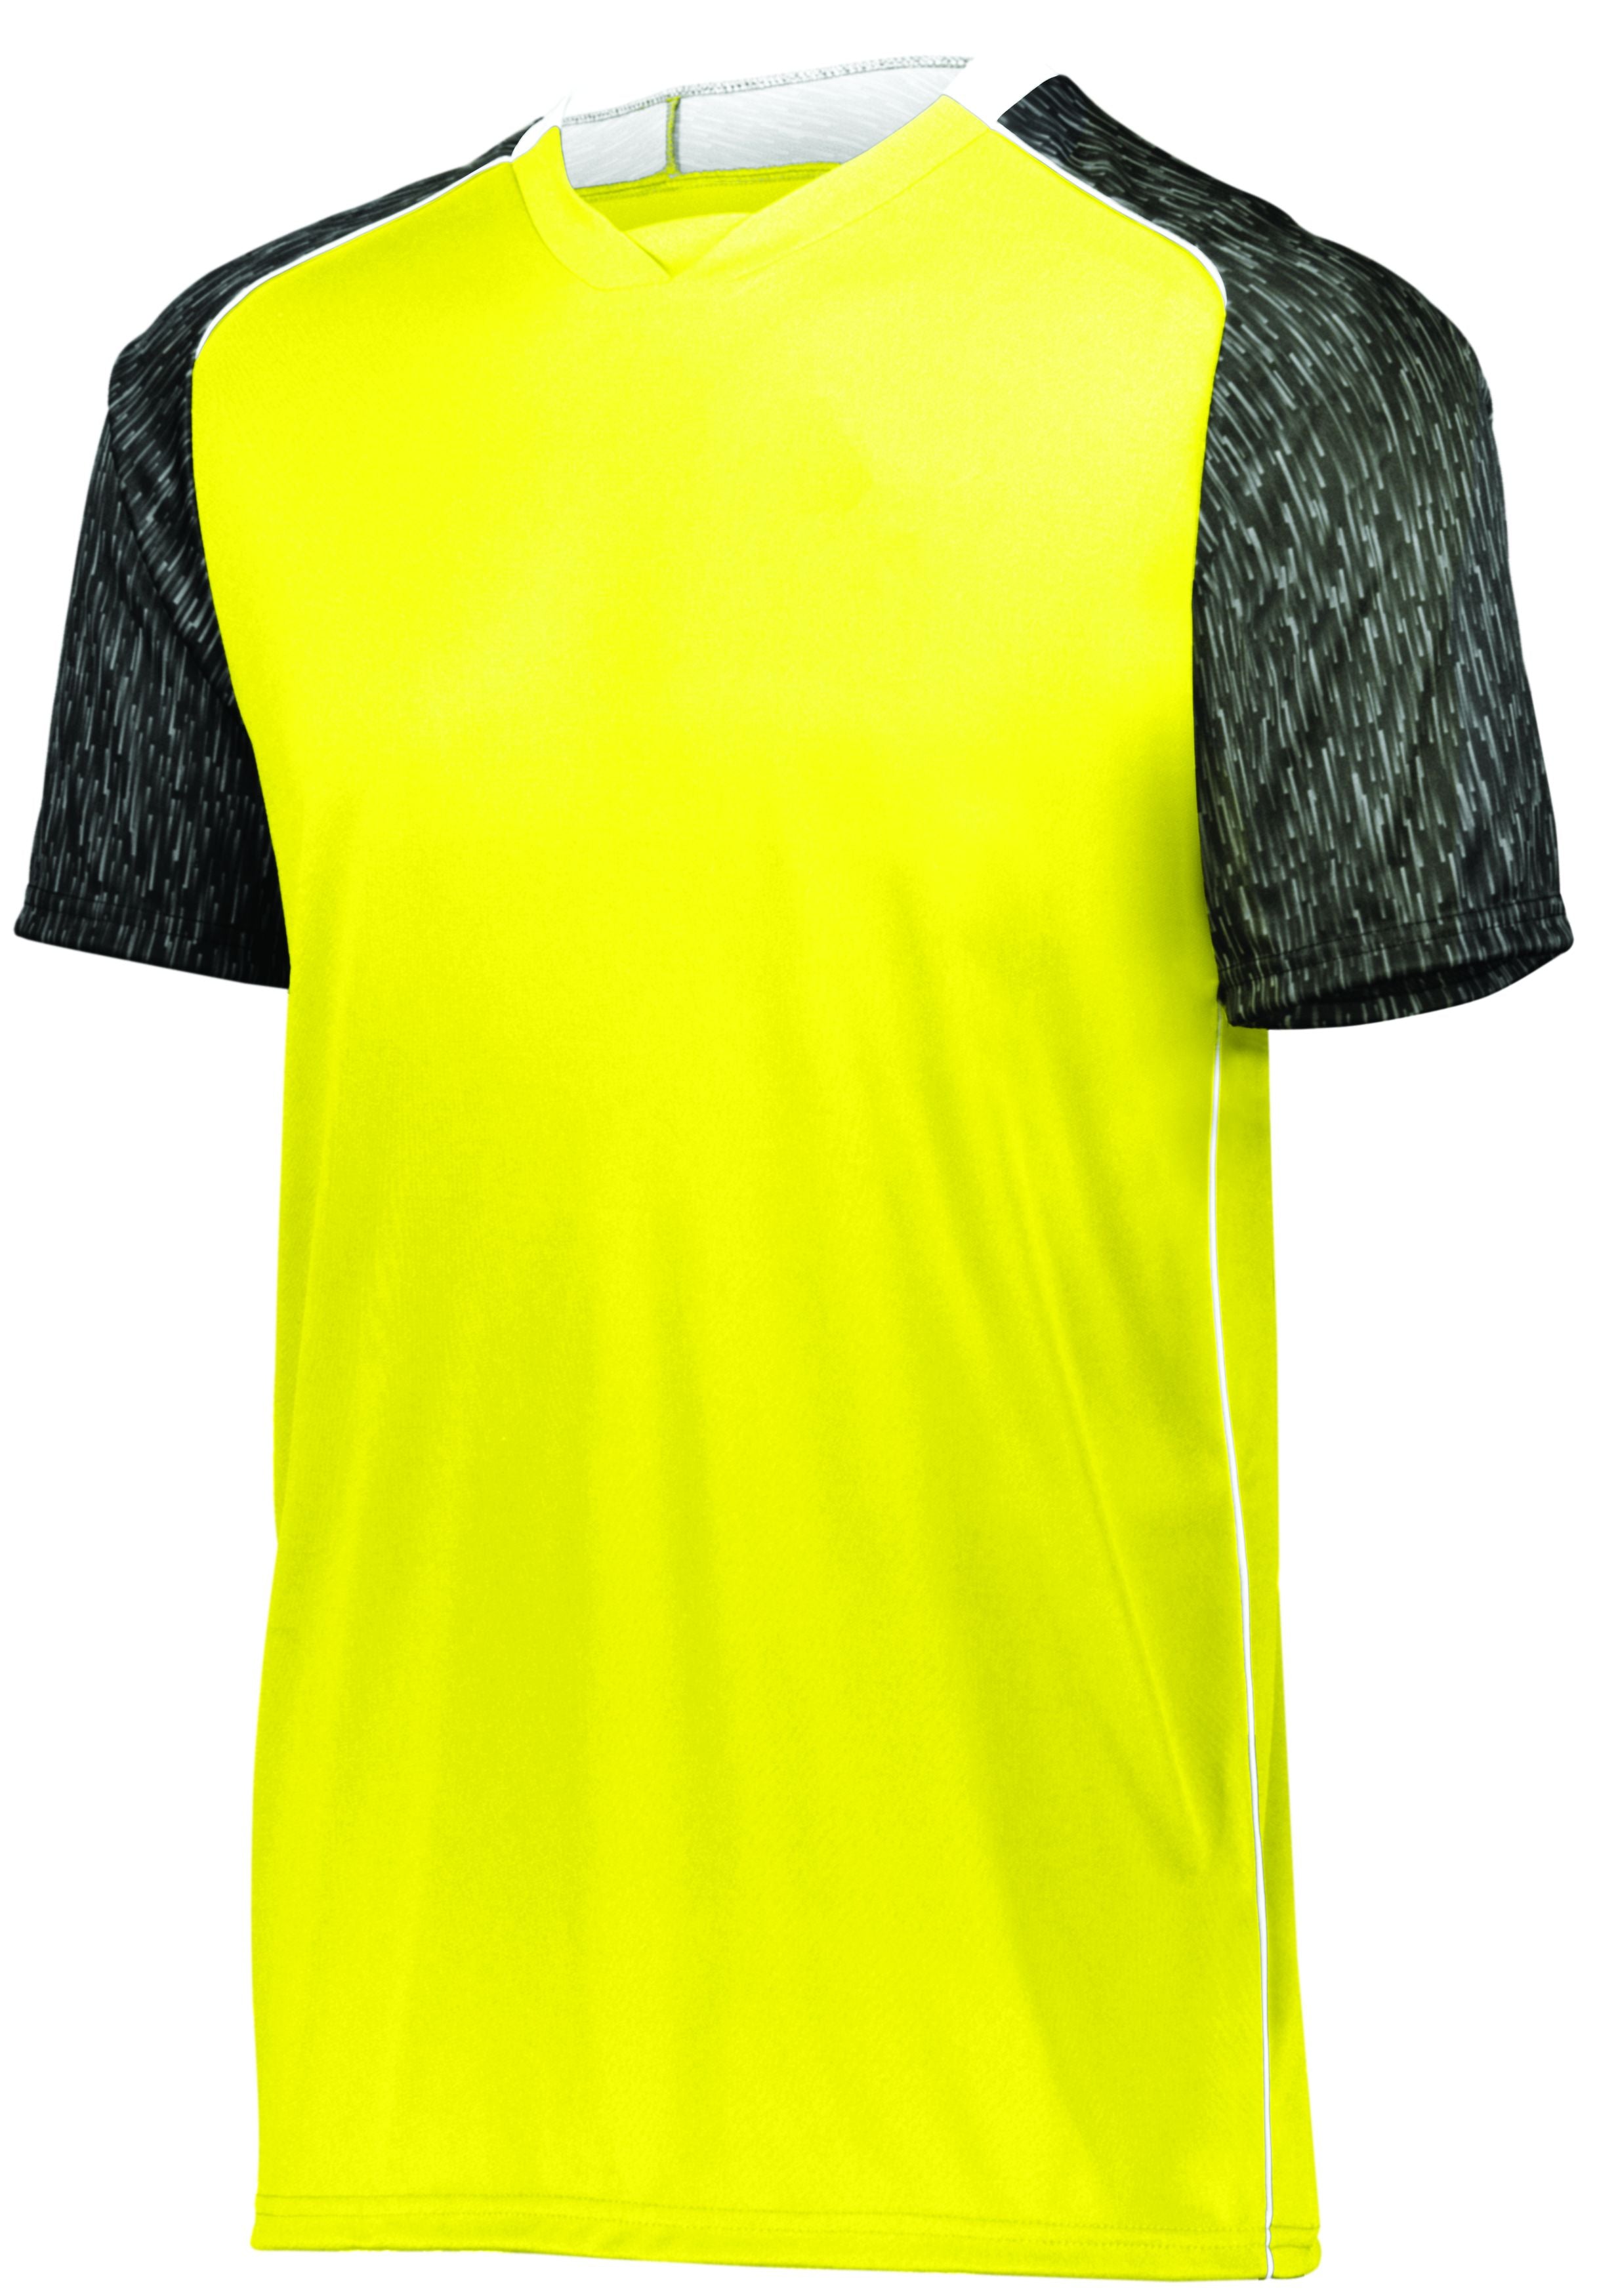 High 5 Youth Hawthorn Soccer Jersey in Power Yellow/Black Print/White  -Part of the Youth, Youth-Jersey, High5-Products, Soccer, Shirts, All-Sports-1 product lines at KanaleyCreations.com